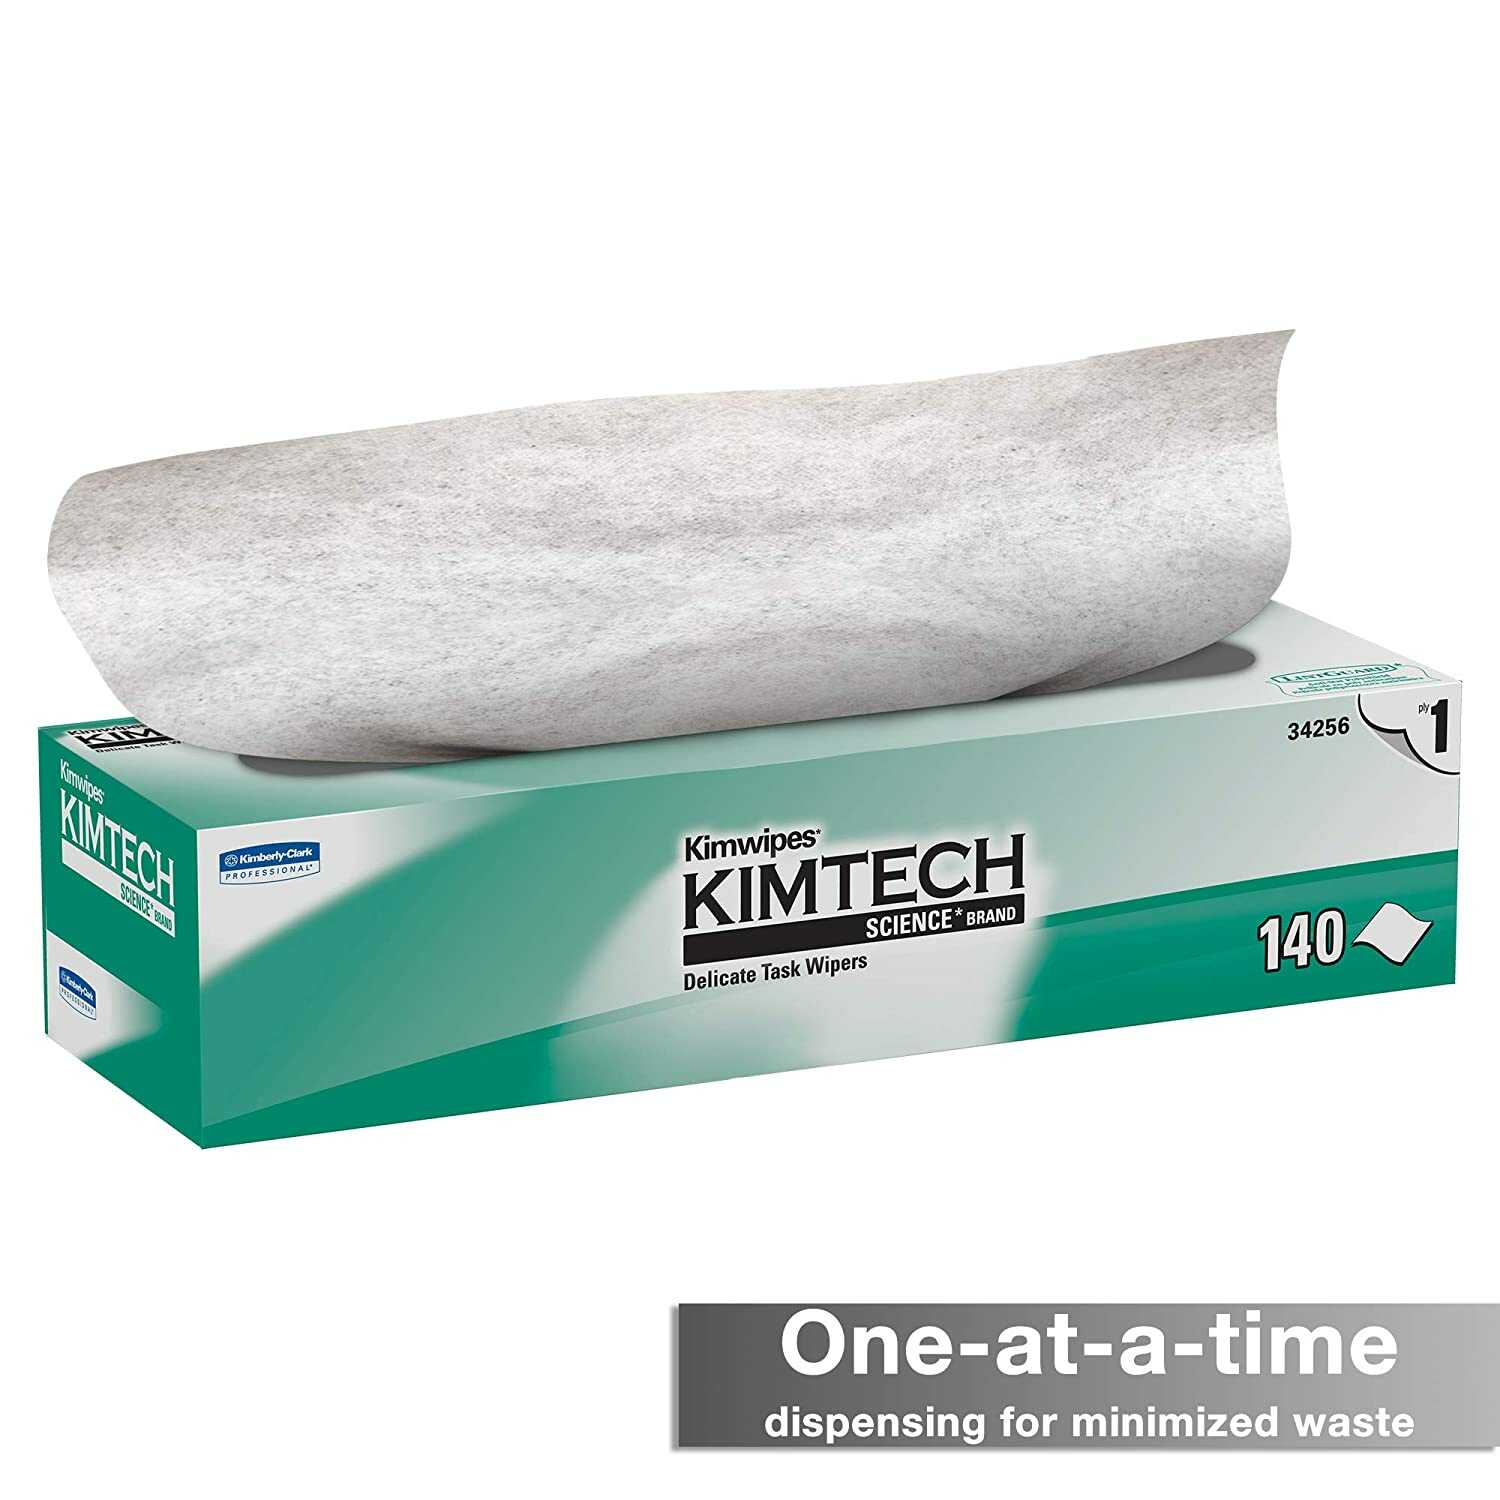 KIMTECH SCIENCE* KIMWIPES* Delicate Task Wipers / Pop-Up Box / 37 cm x 42 cm, 34256 (Pack of 15)